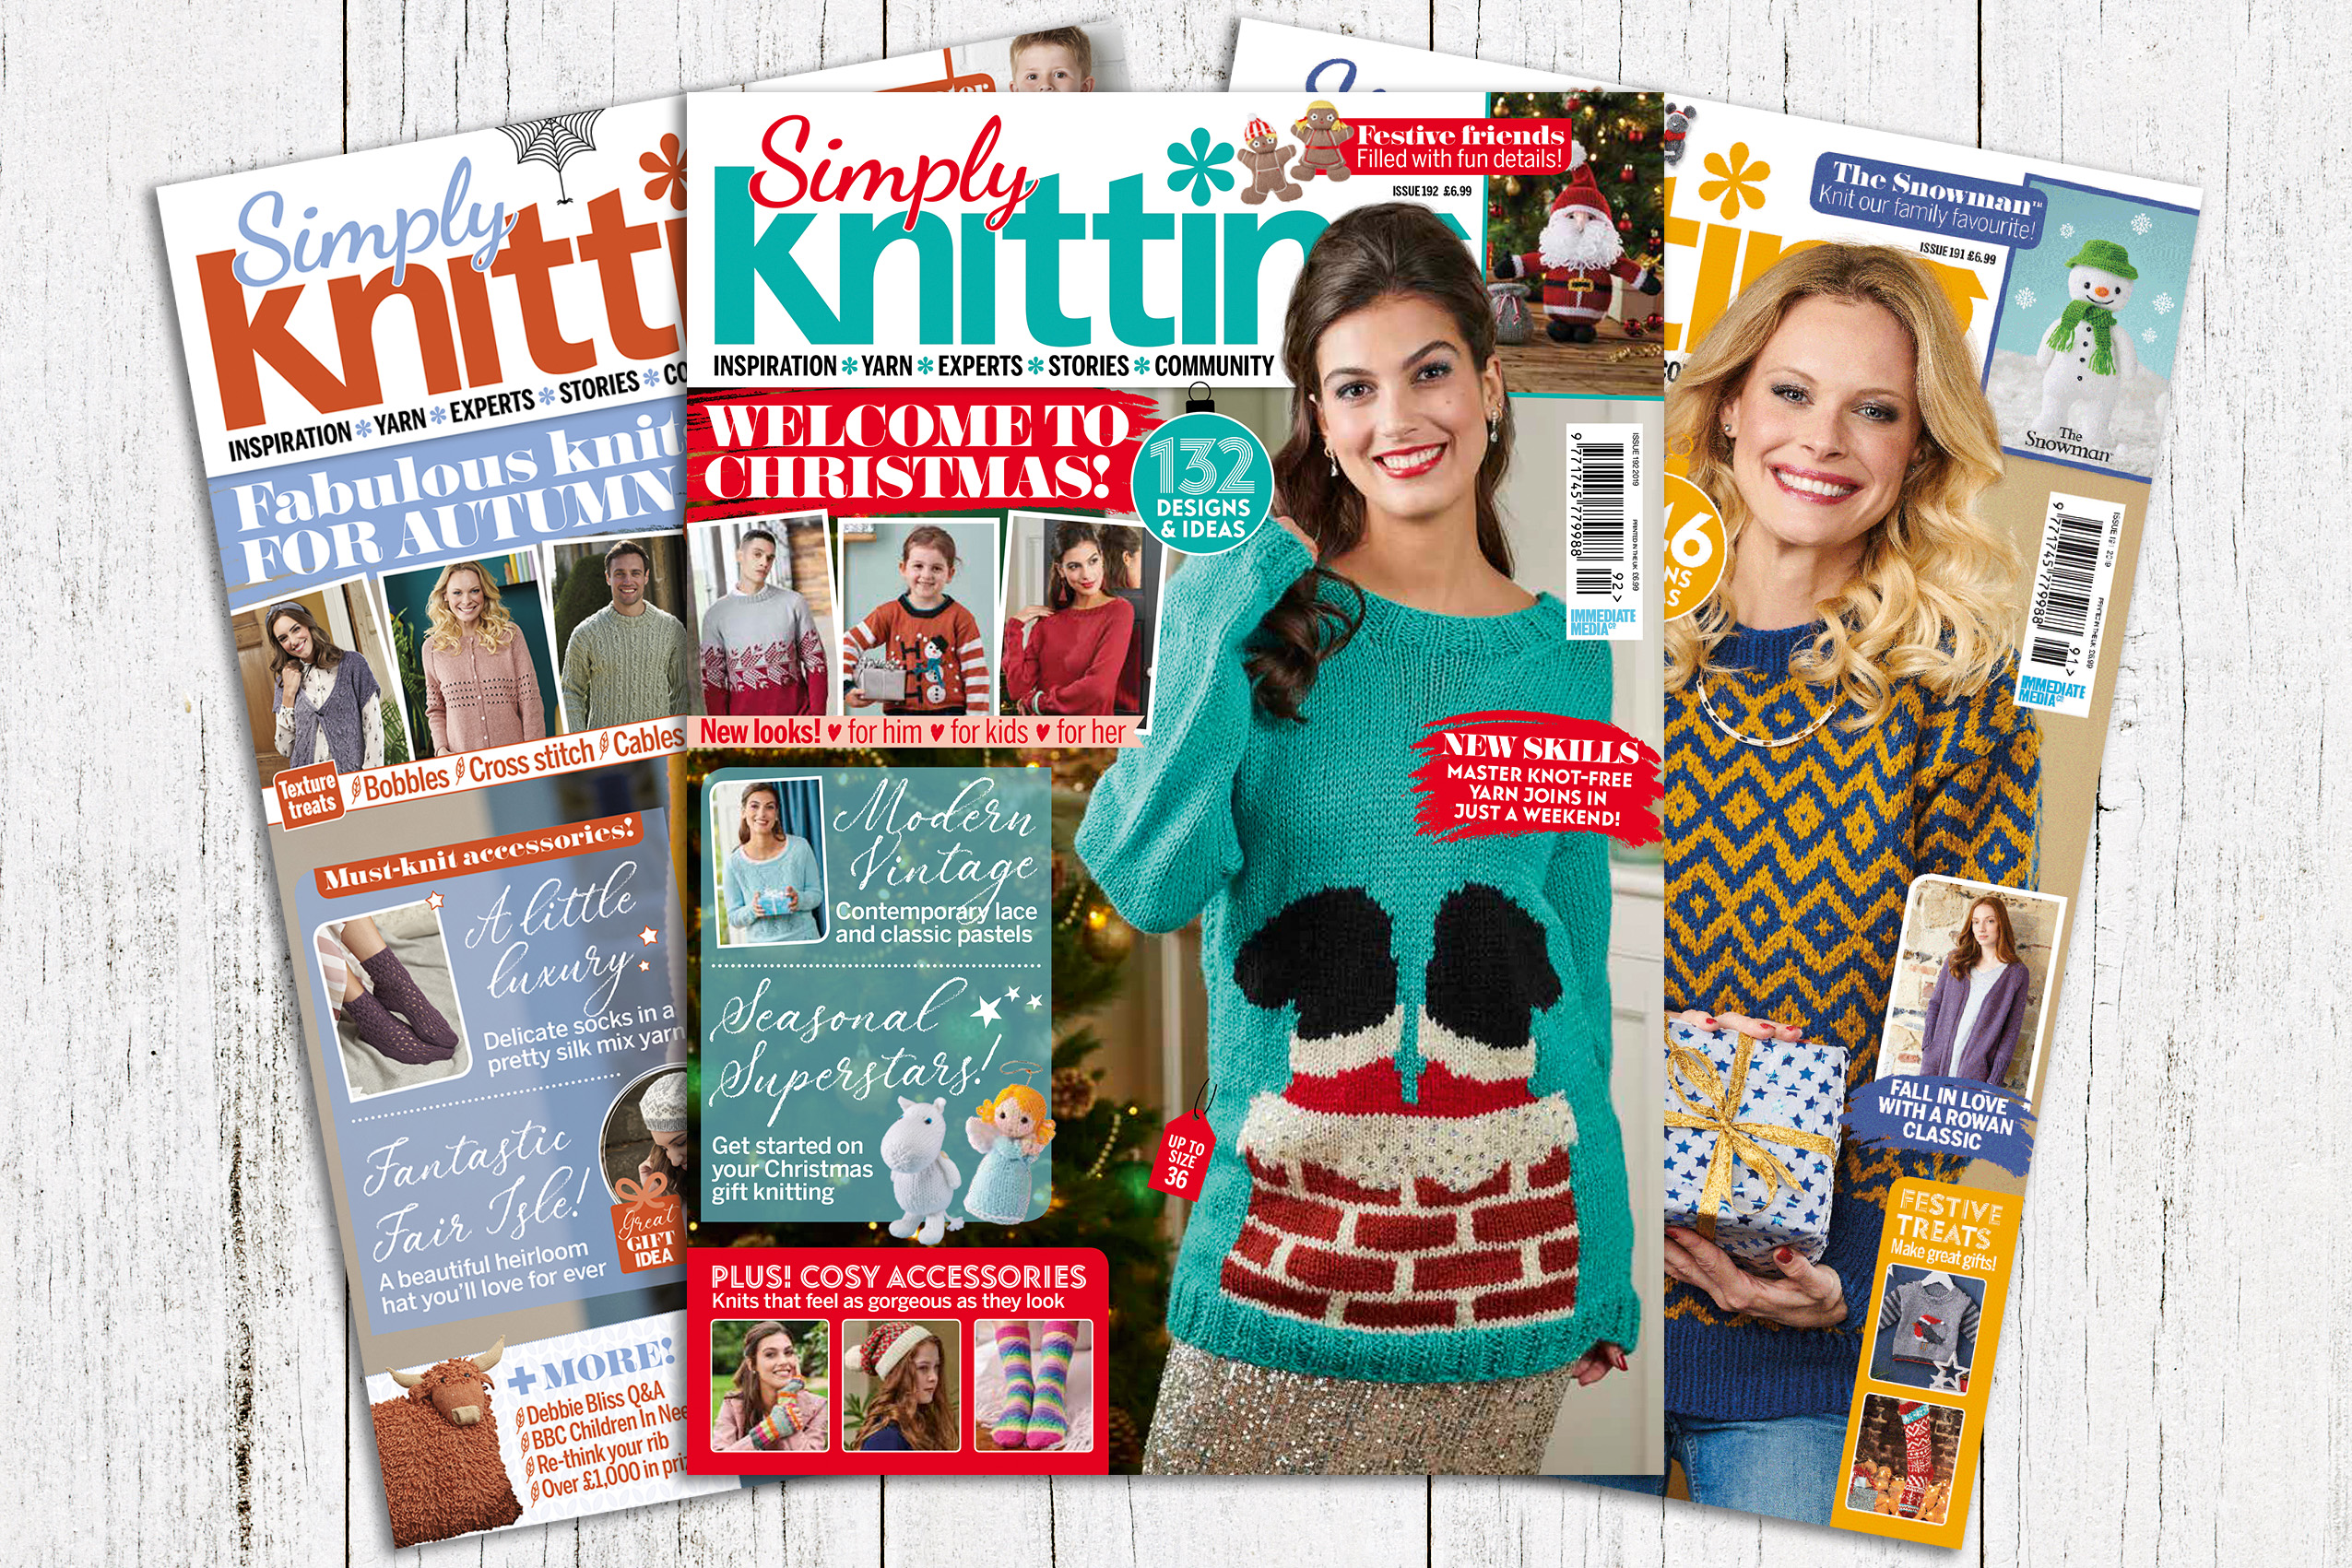 Simply Knitting pattern corrections - Gathered